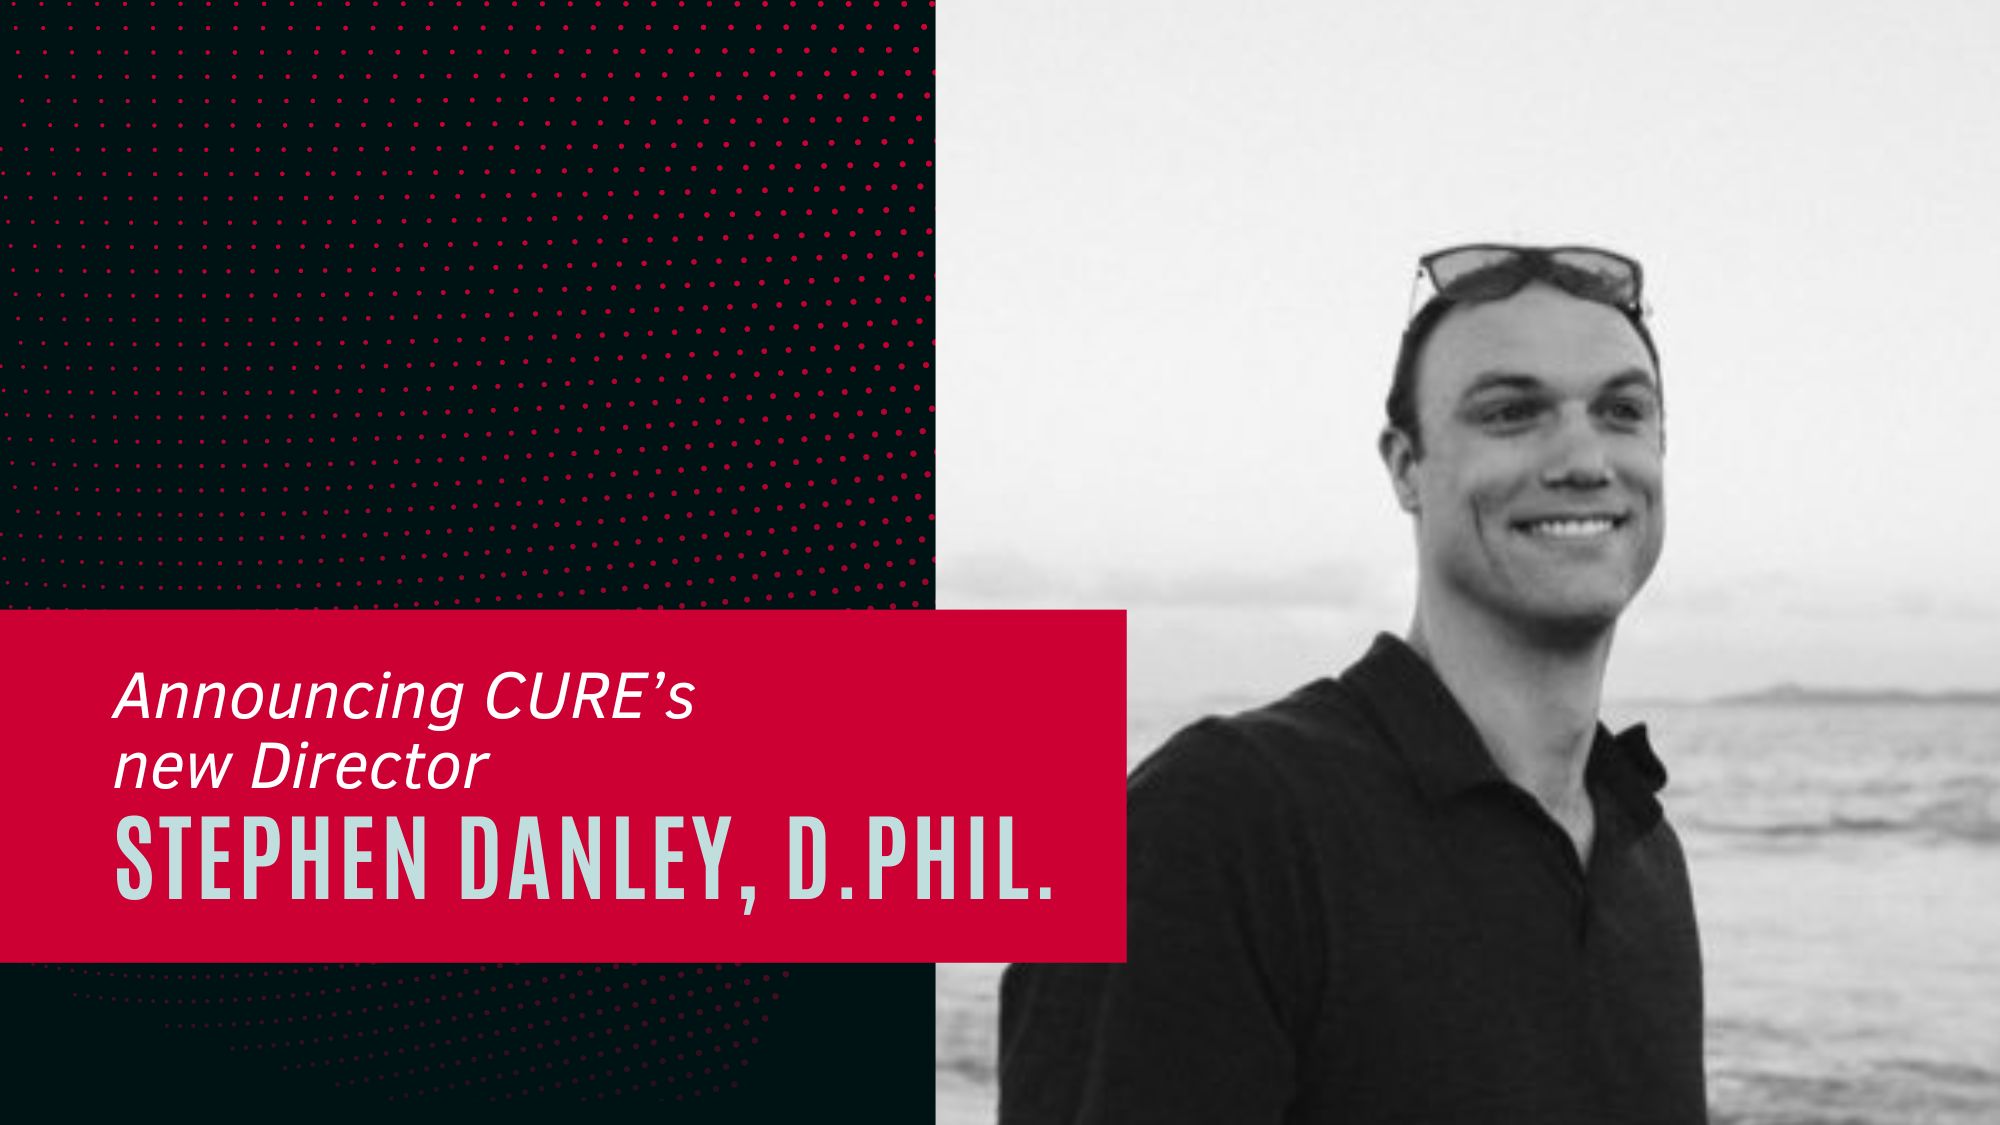 Announcing CURE's new director, Stephen Danley Ph.D.